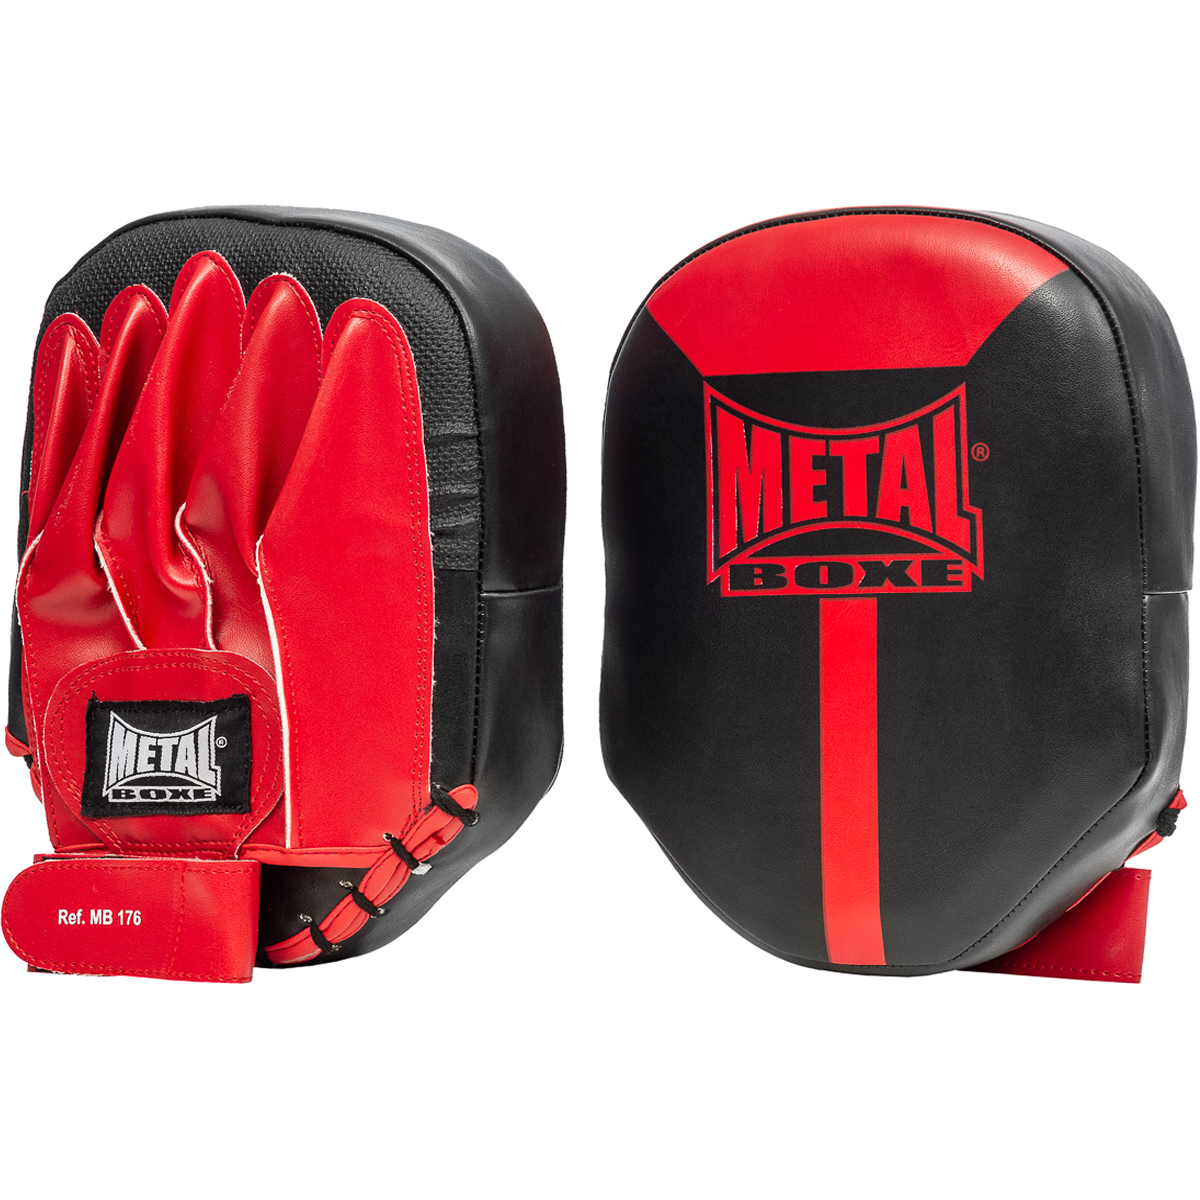 pattes-ours-metal-boxe-mb176